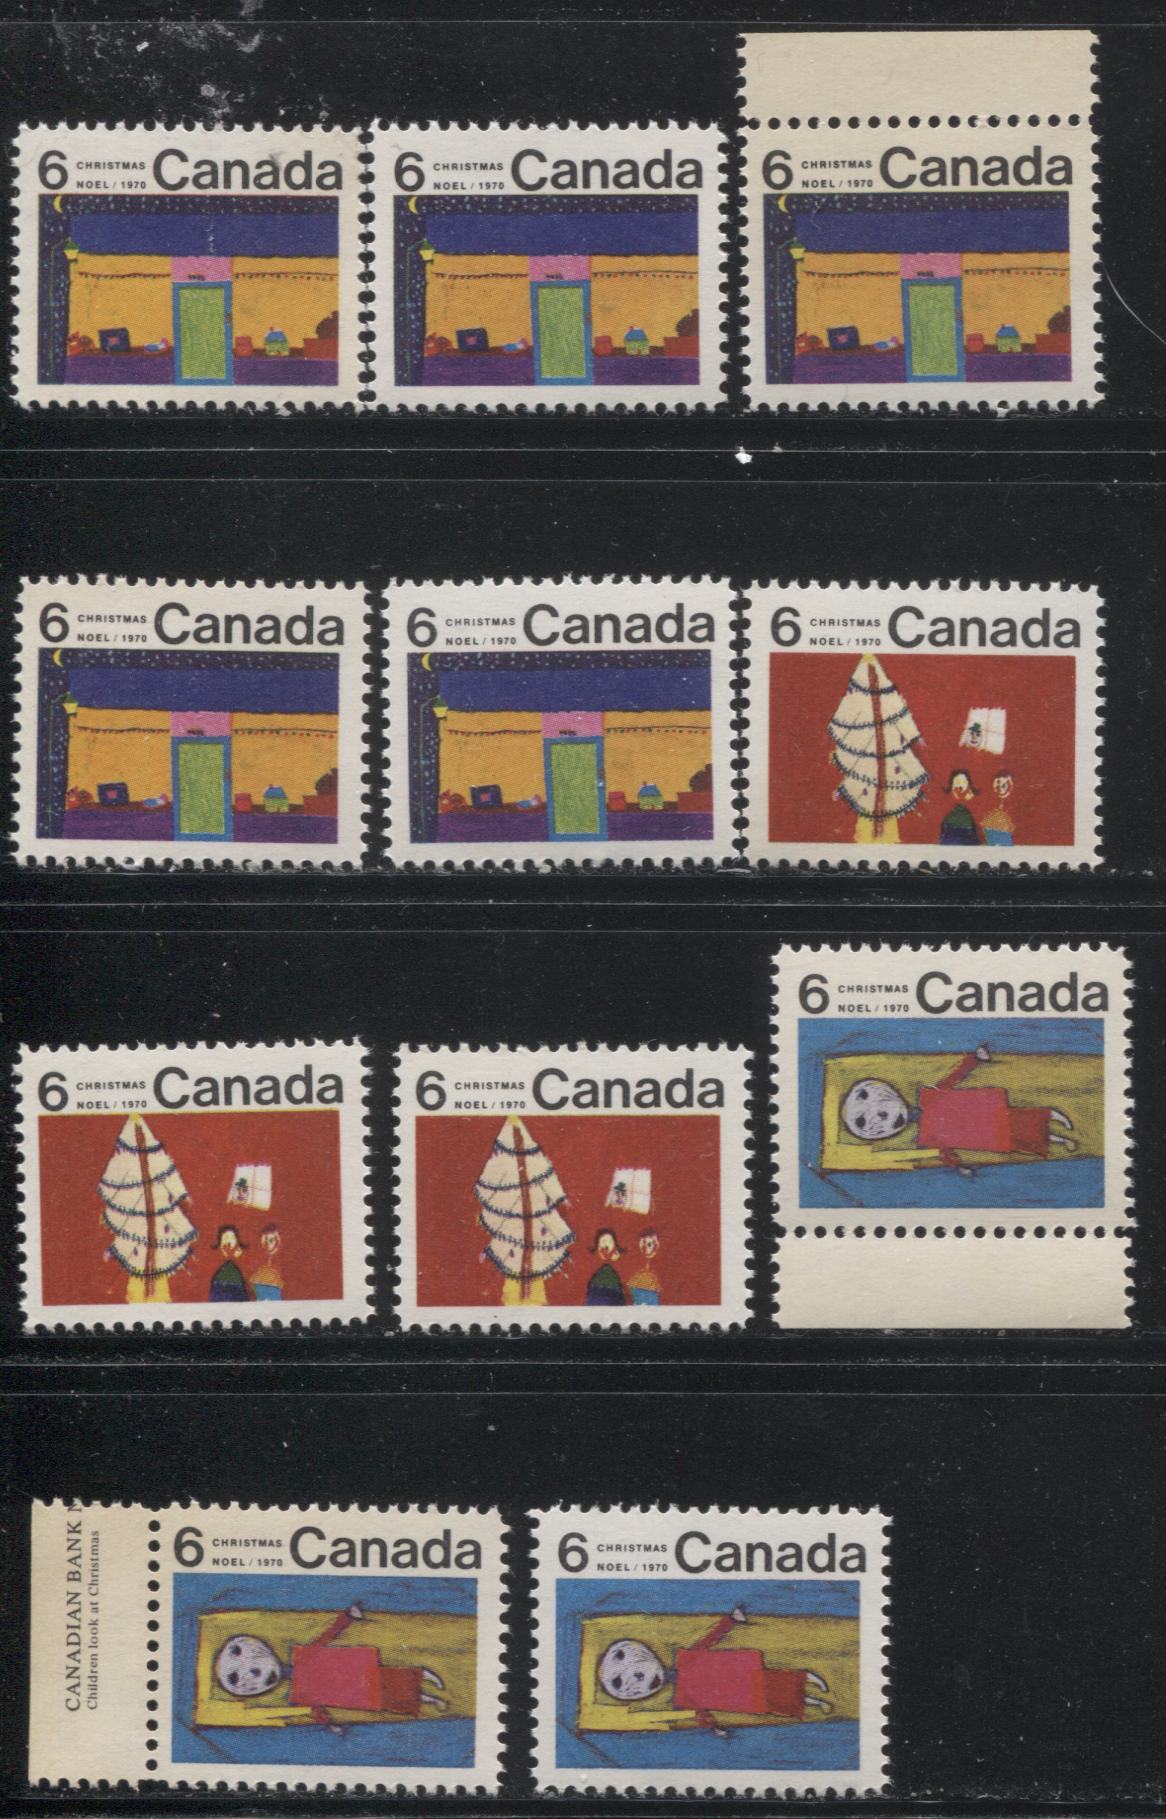 Lot 163 Canada #524-528 6c Multicoloured 1970 Christmas Issue, A Complete Set of 11 Constant Plate Varieties From Combination 1, Ribbed HB11 Paper, Perf. 11.85 x 11.9